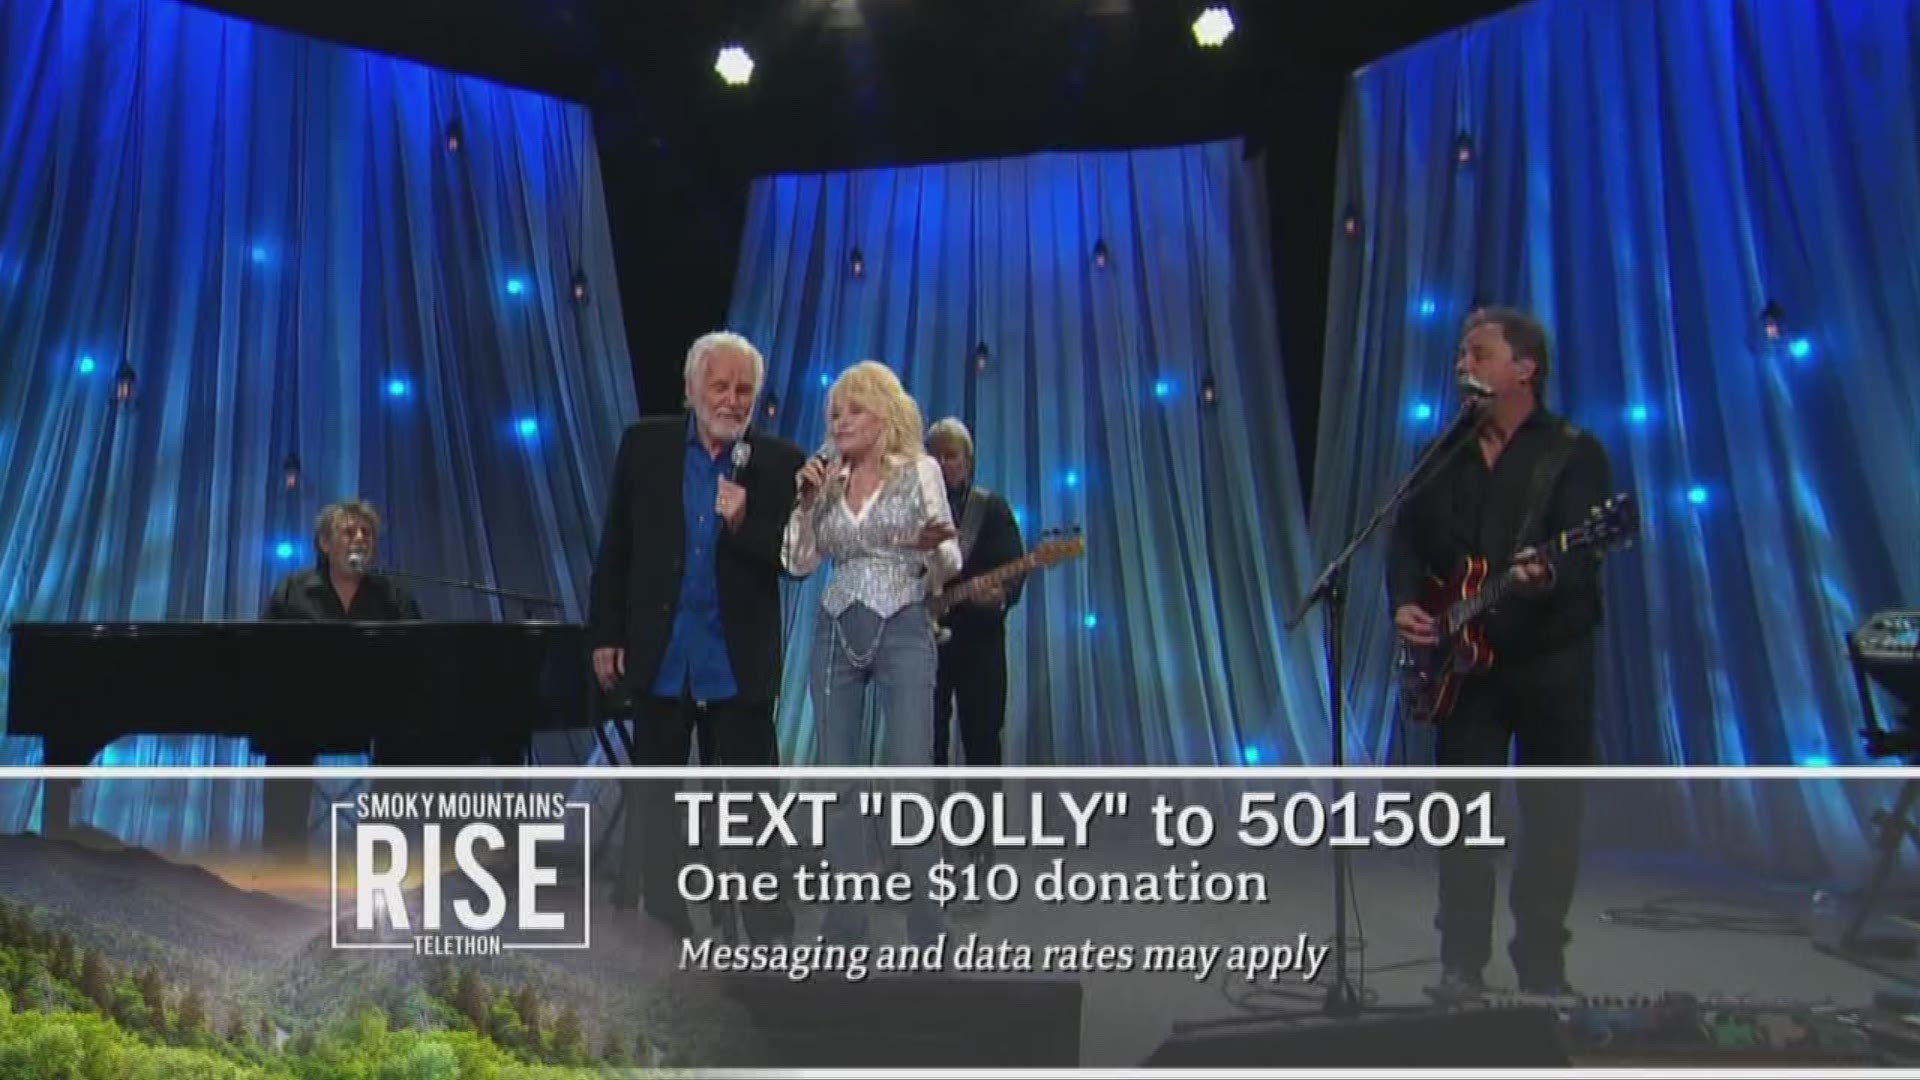 Dolly Parton joined by Kenny Rogers to sing their famous duet Islands in the Stream on the Smoky Mountains Rise telethon